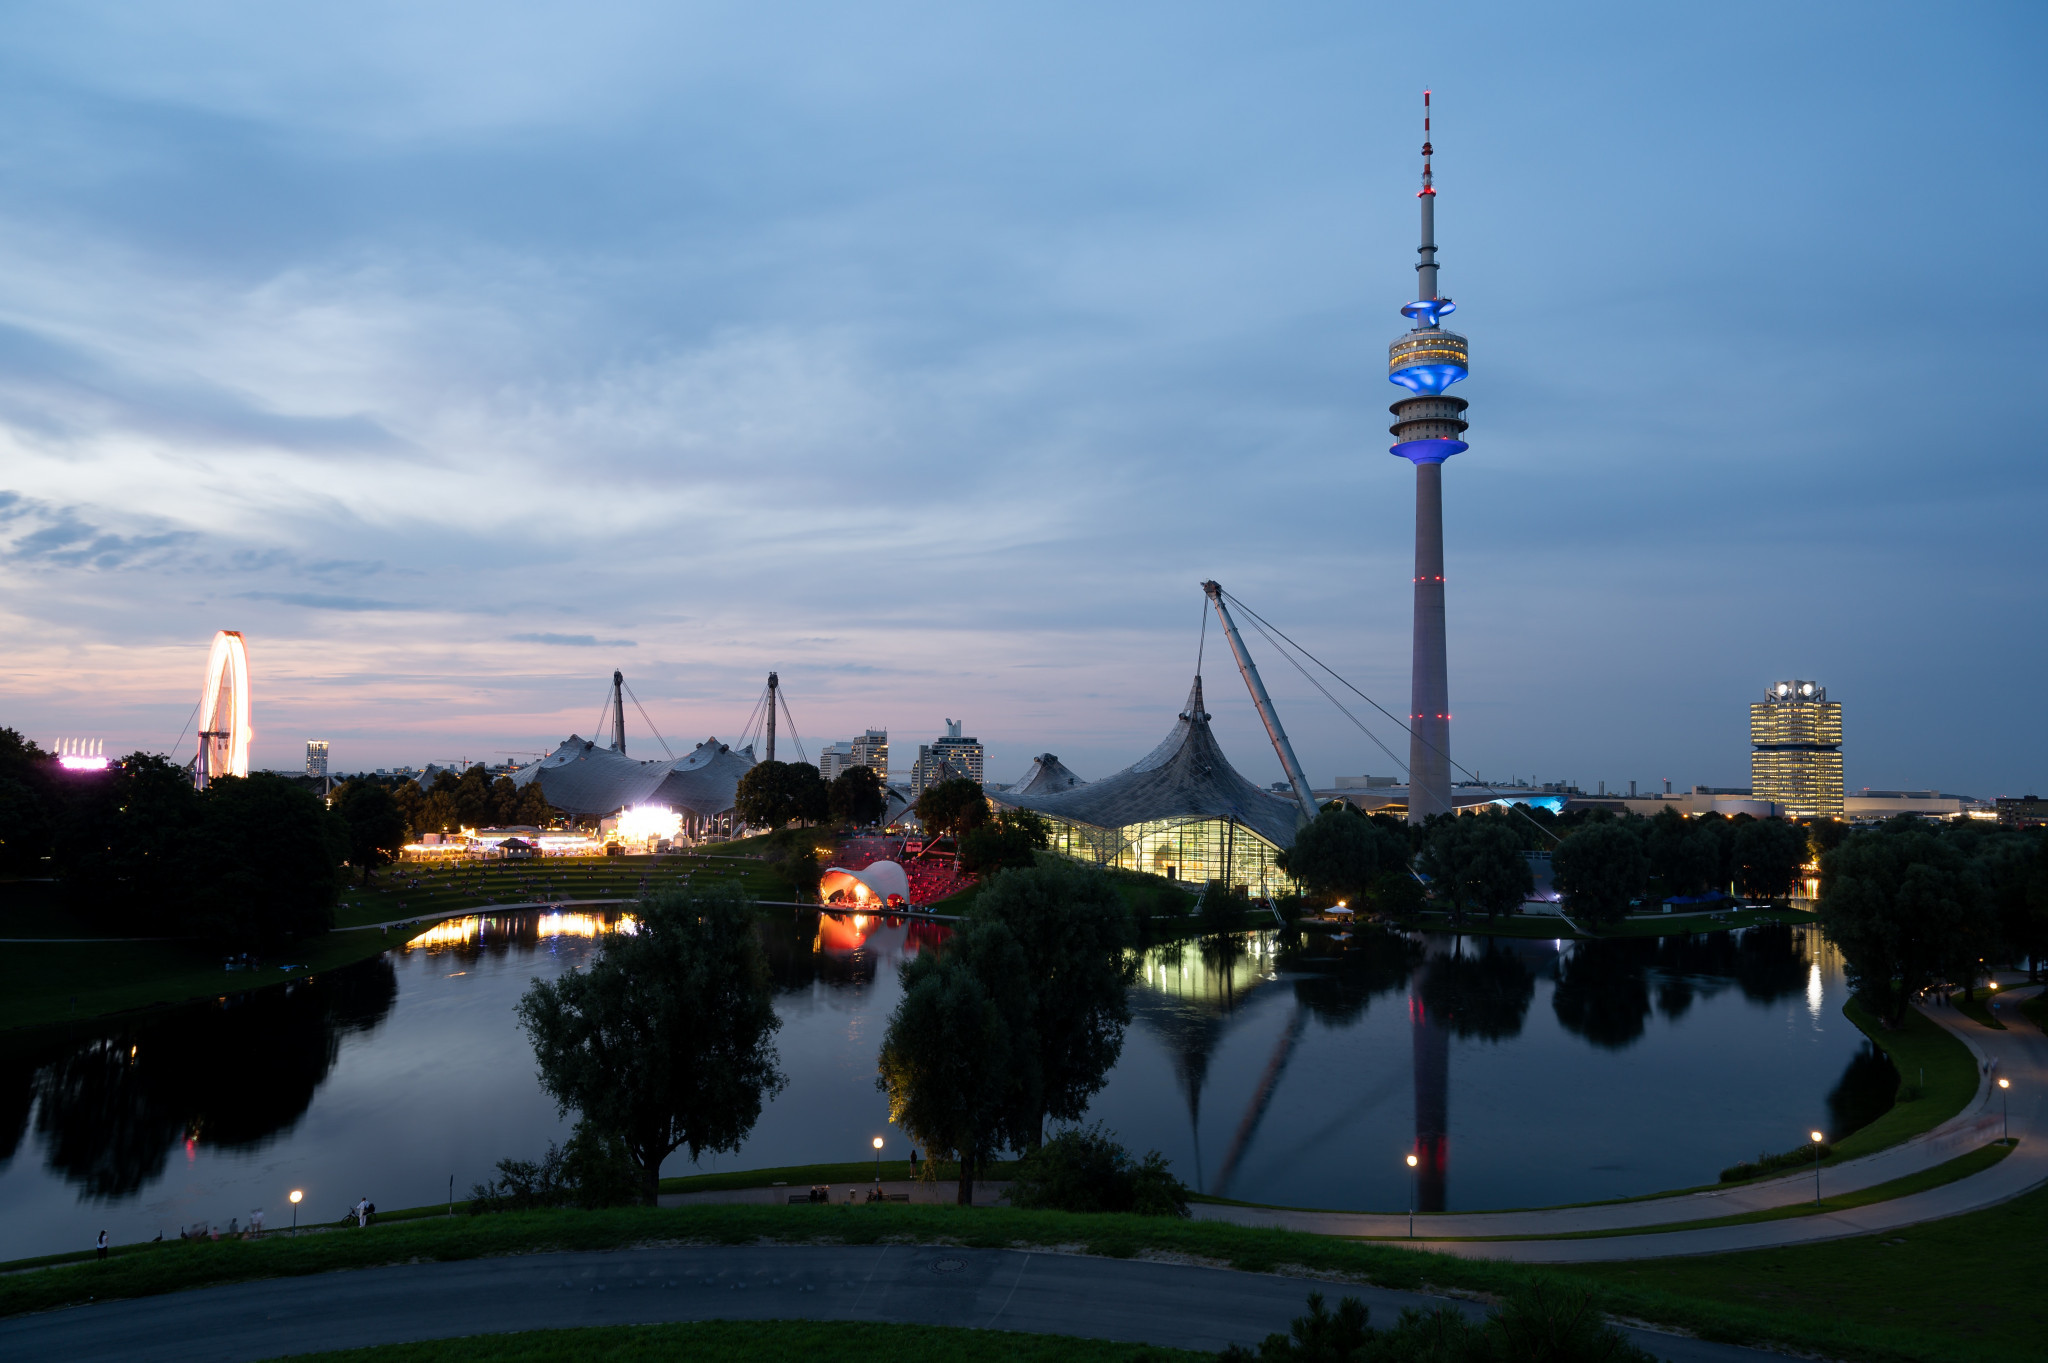 The Olympic Tower was illuminated in August 2021 to mark one year to go until the Munich 2022 European Championships ©Getty Images